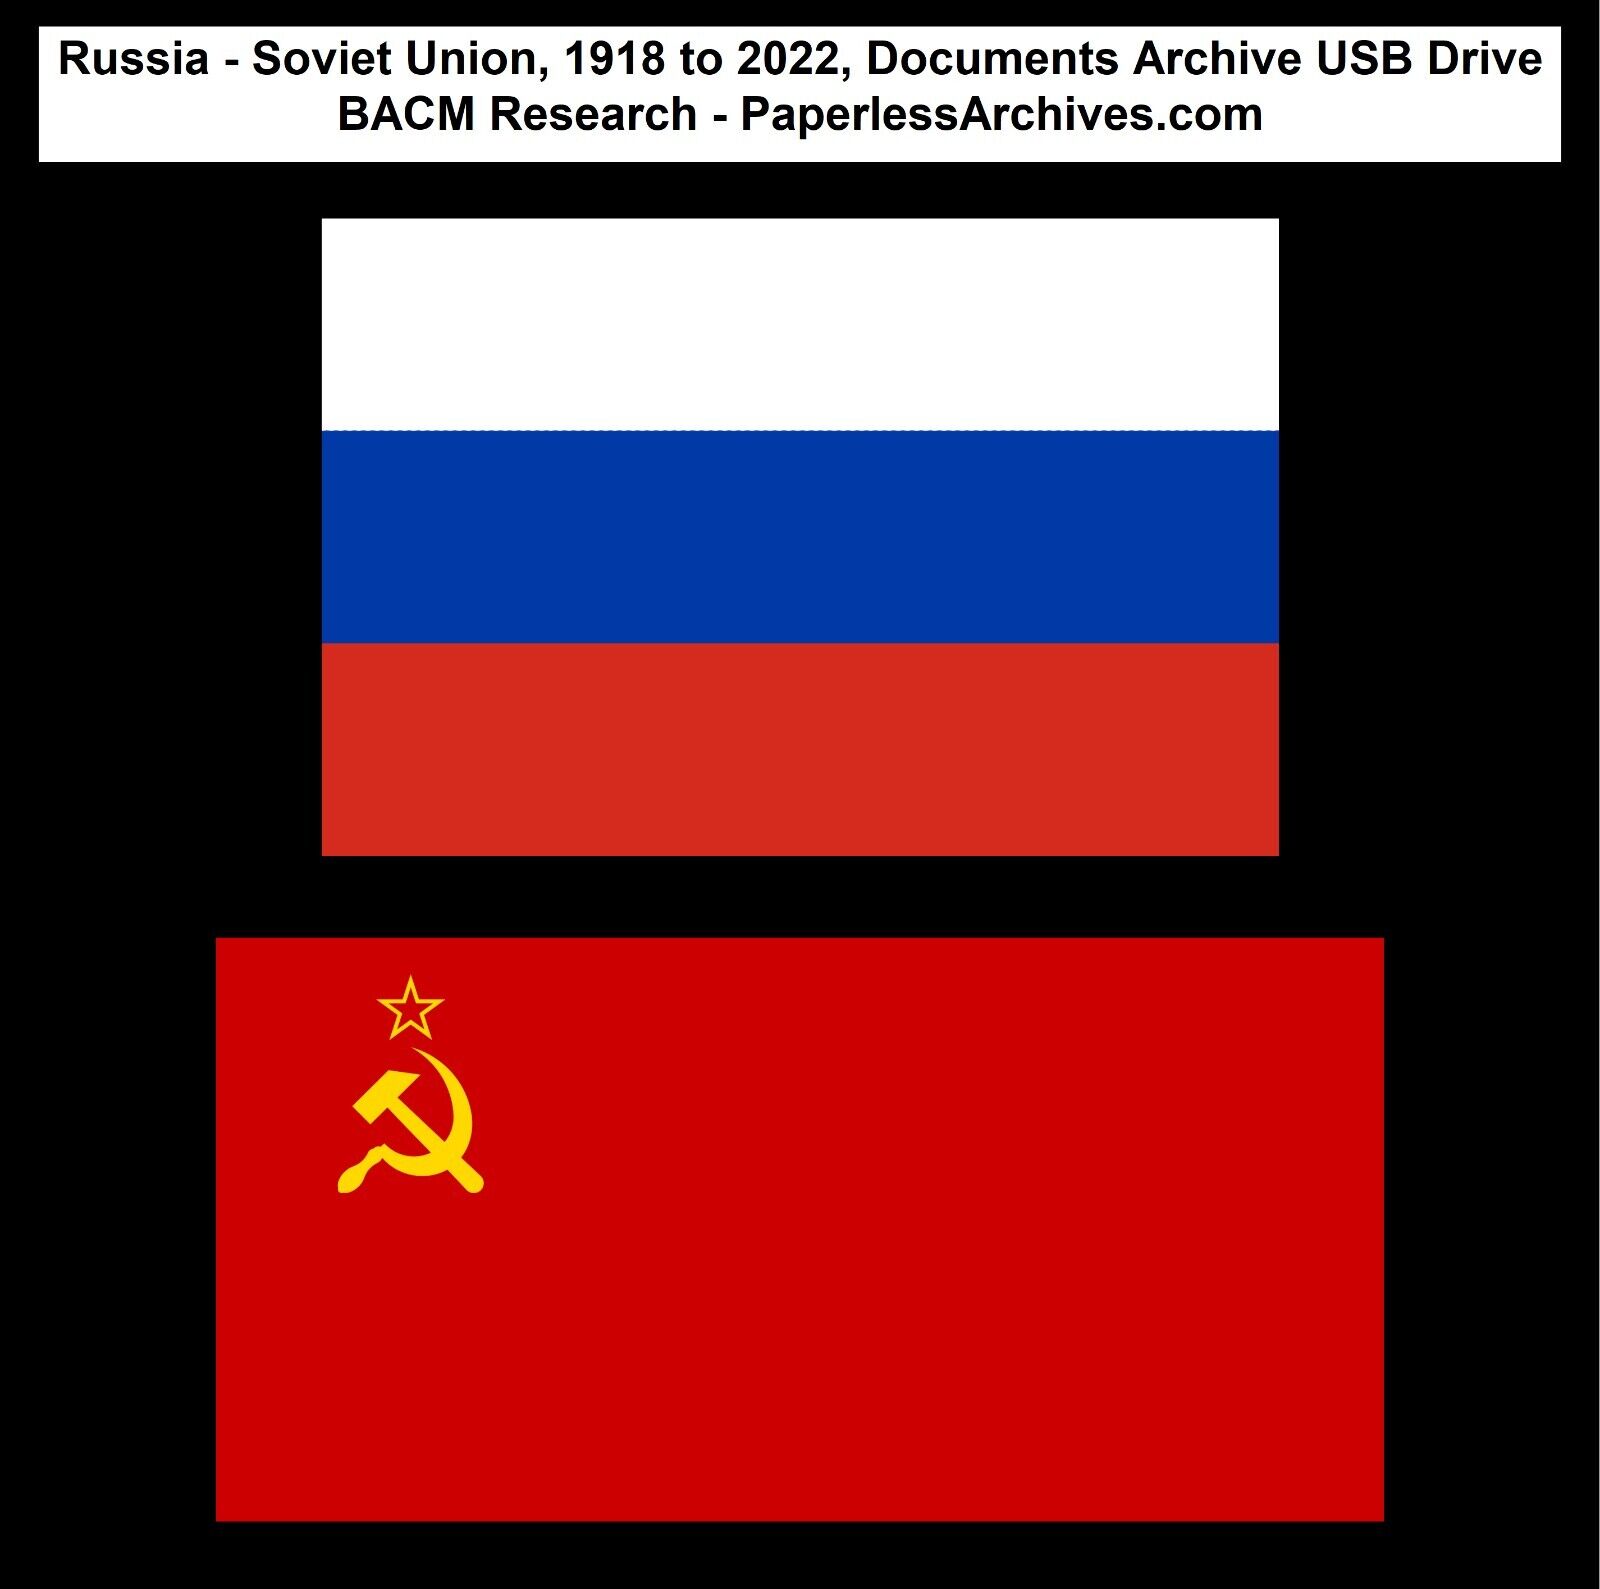 Russia - Soviet Union, 1918 to 2022, Documents Archive USB Drive